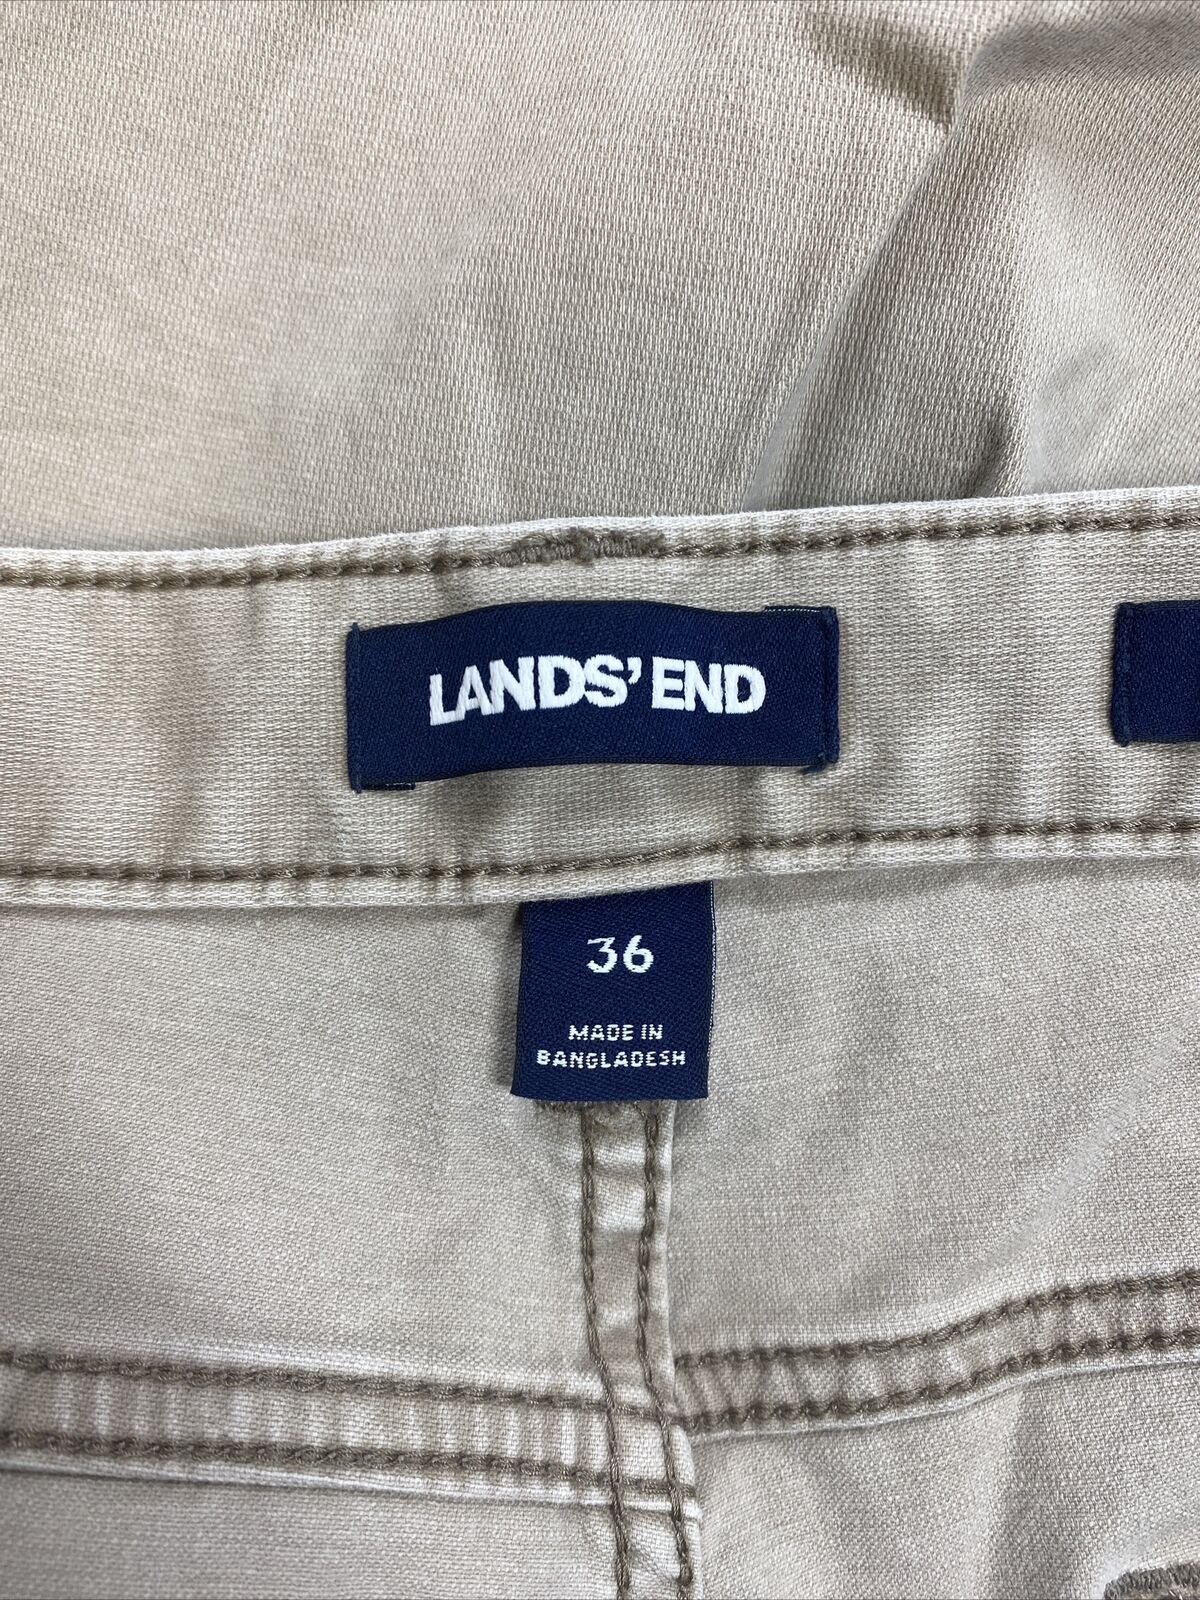 Lands' End Men's Beige Traditional Fit Chino Pants - 36